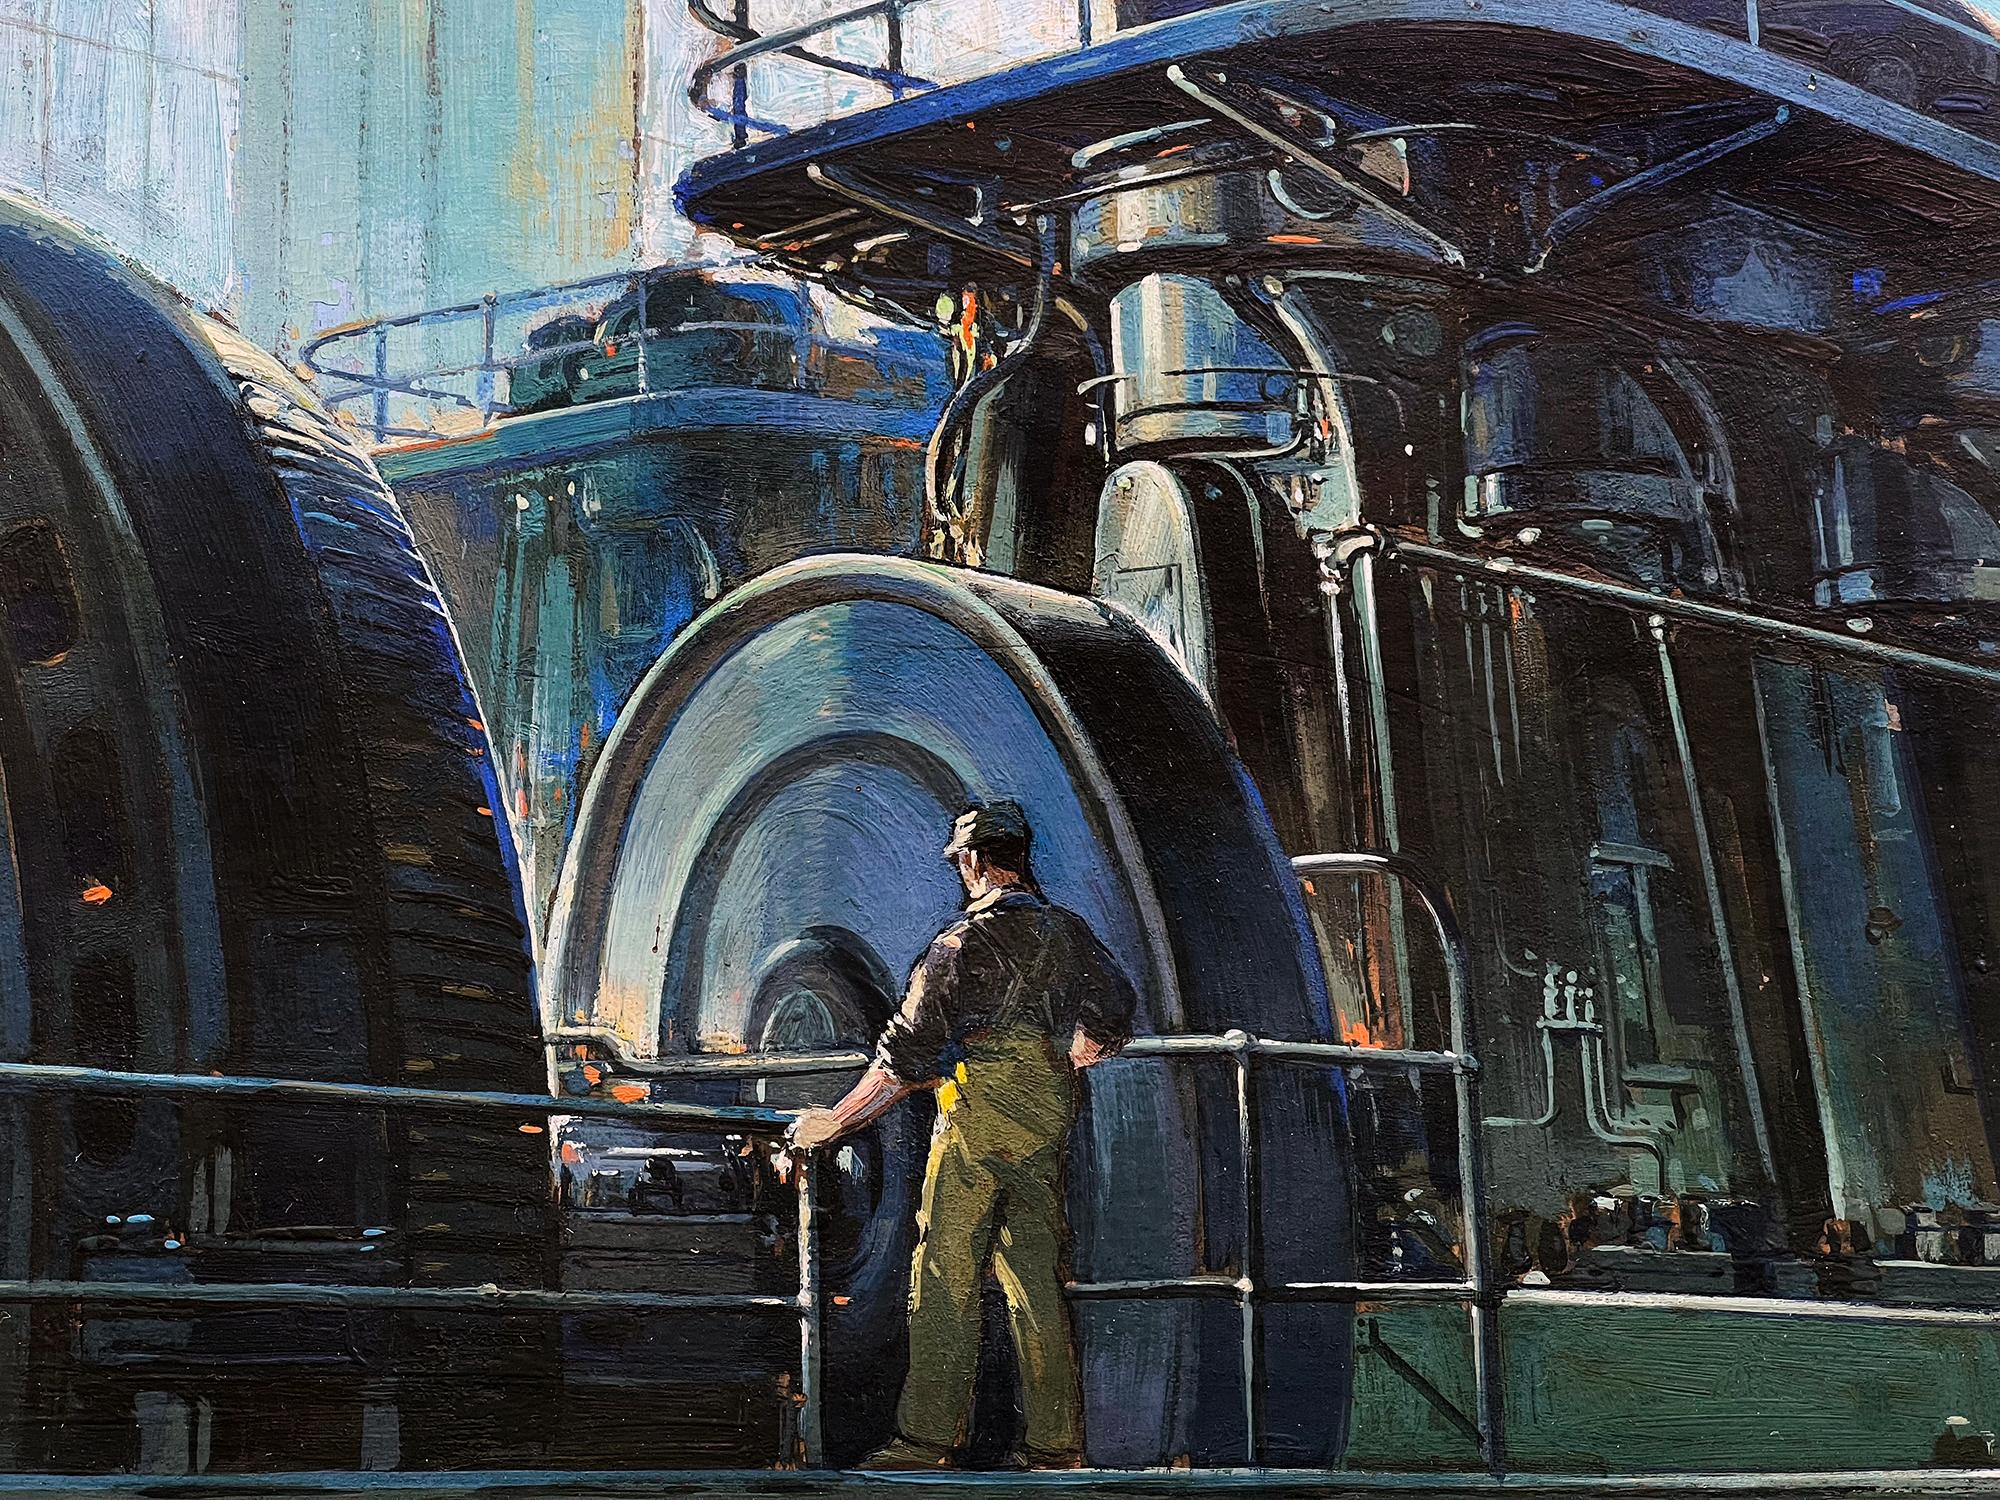 This  Golden Age of Illustration painting juxtaposes modern and ancient industrial practices.  Giant eclectic generators from the current time of the 1920s are compared with animal-propelled technology from  ancient Egypt.  